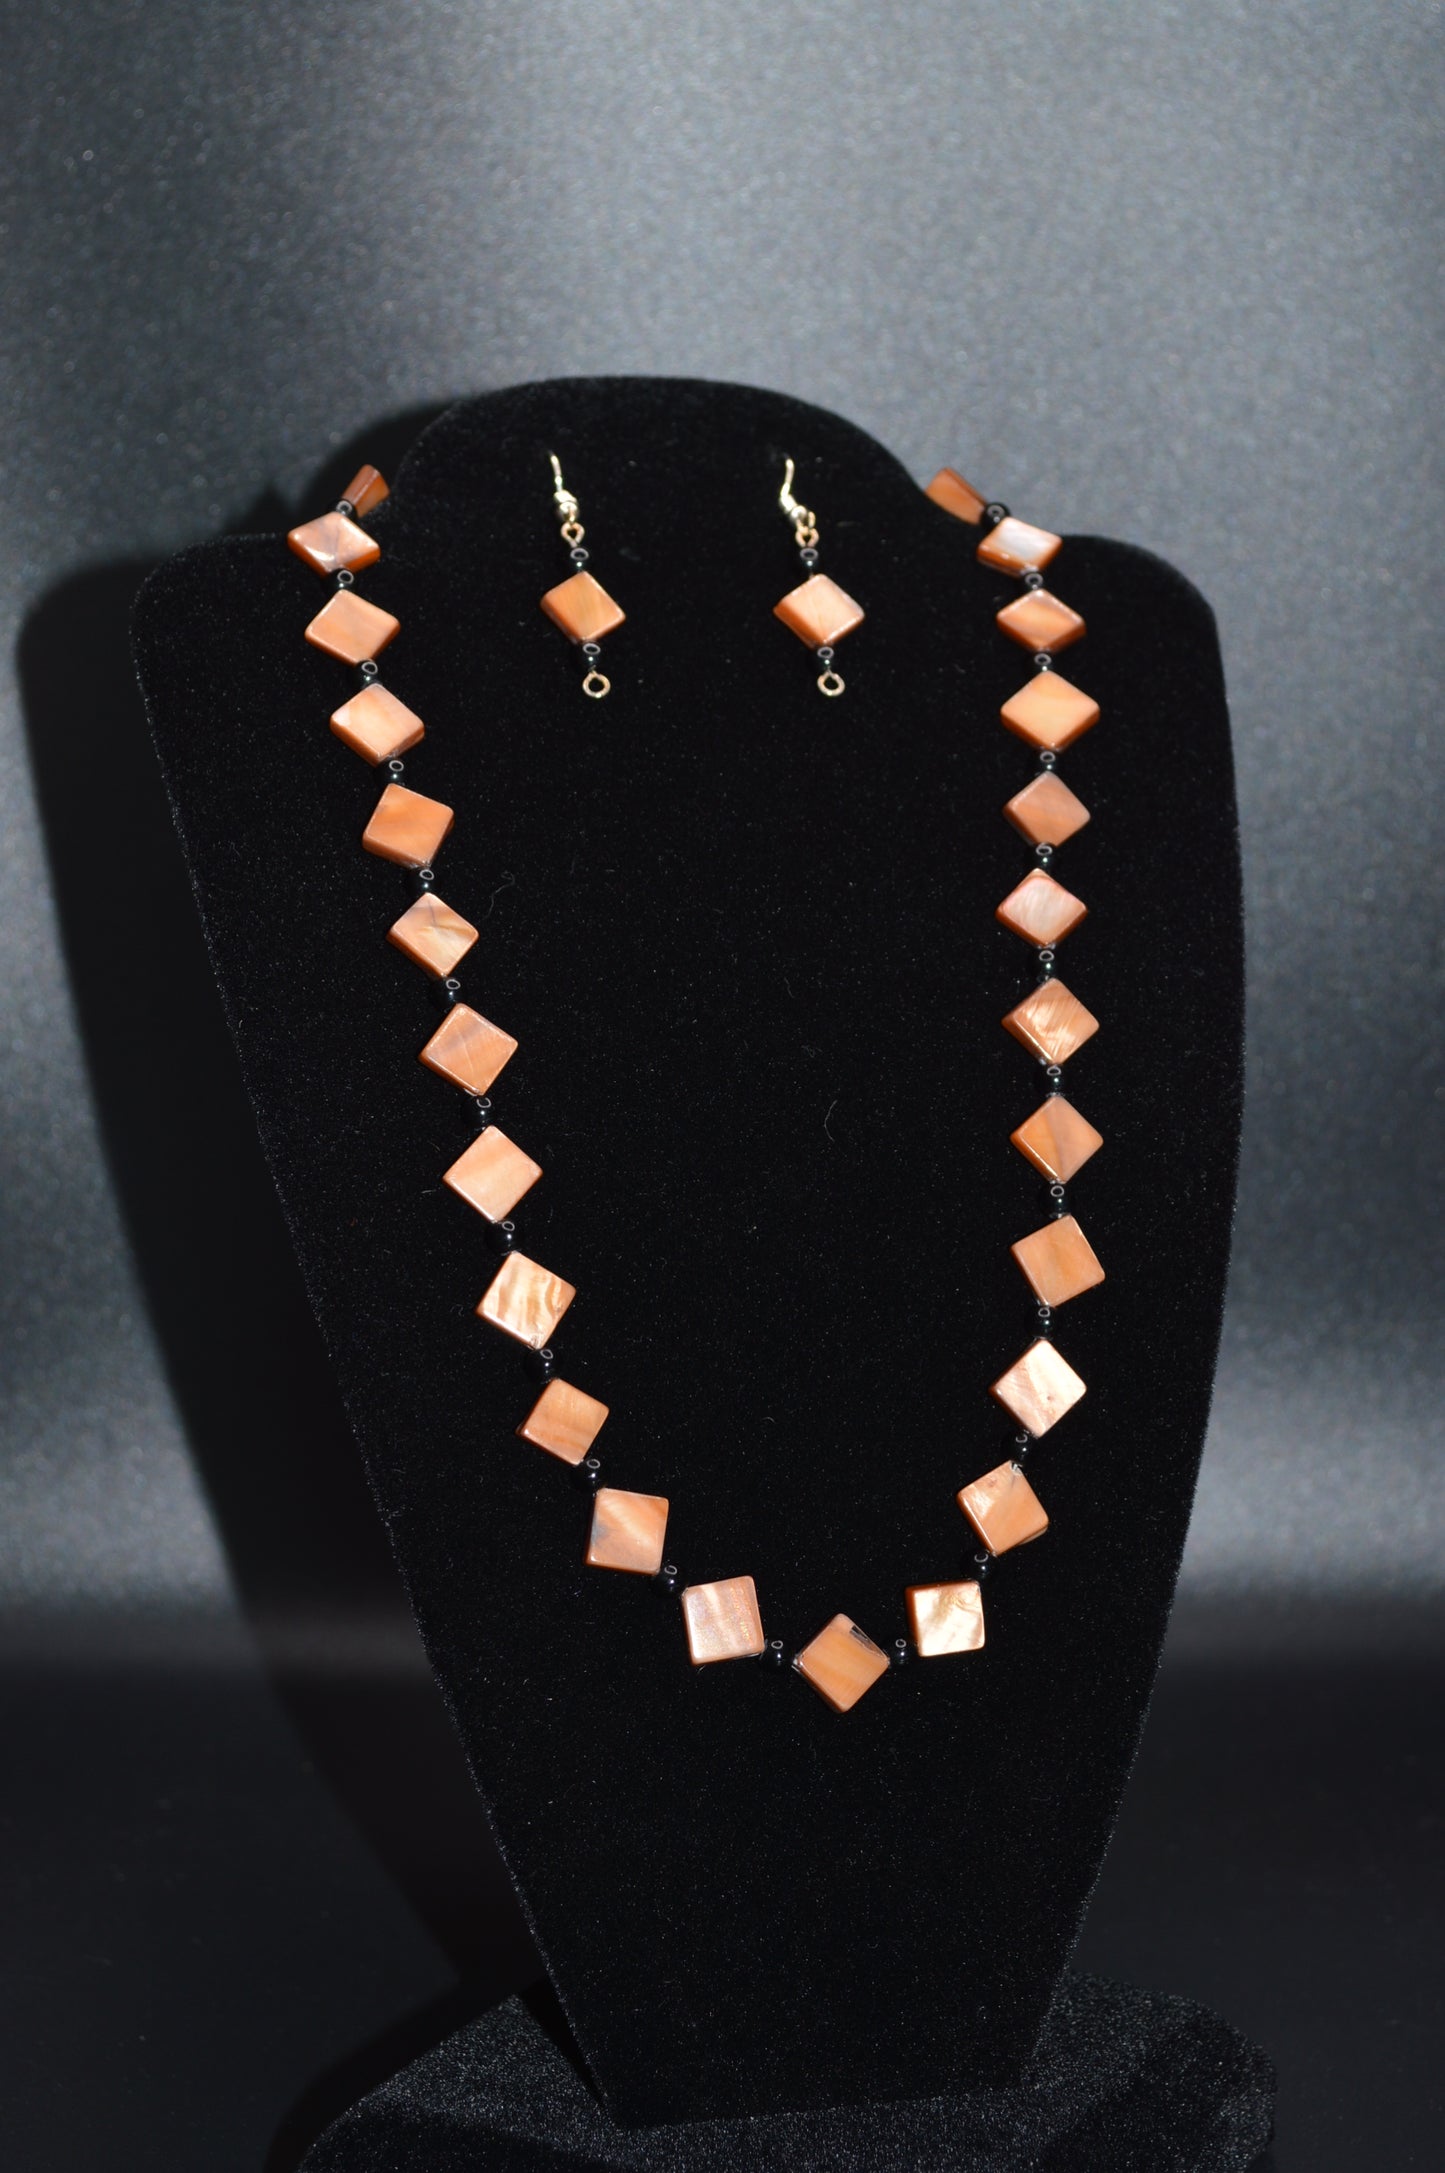 Brown Mother of Pearl Diamonds with Black Beads Necklace and Earring Set